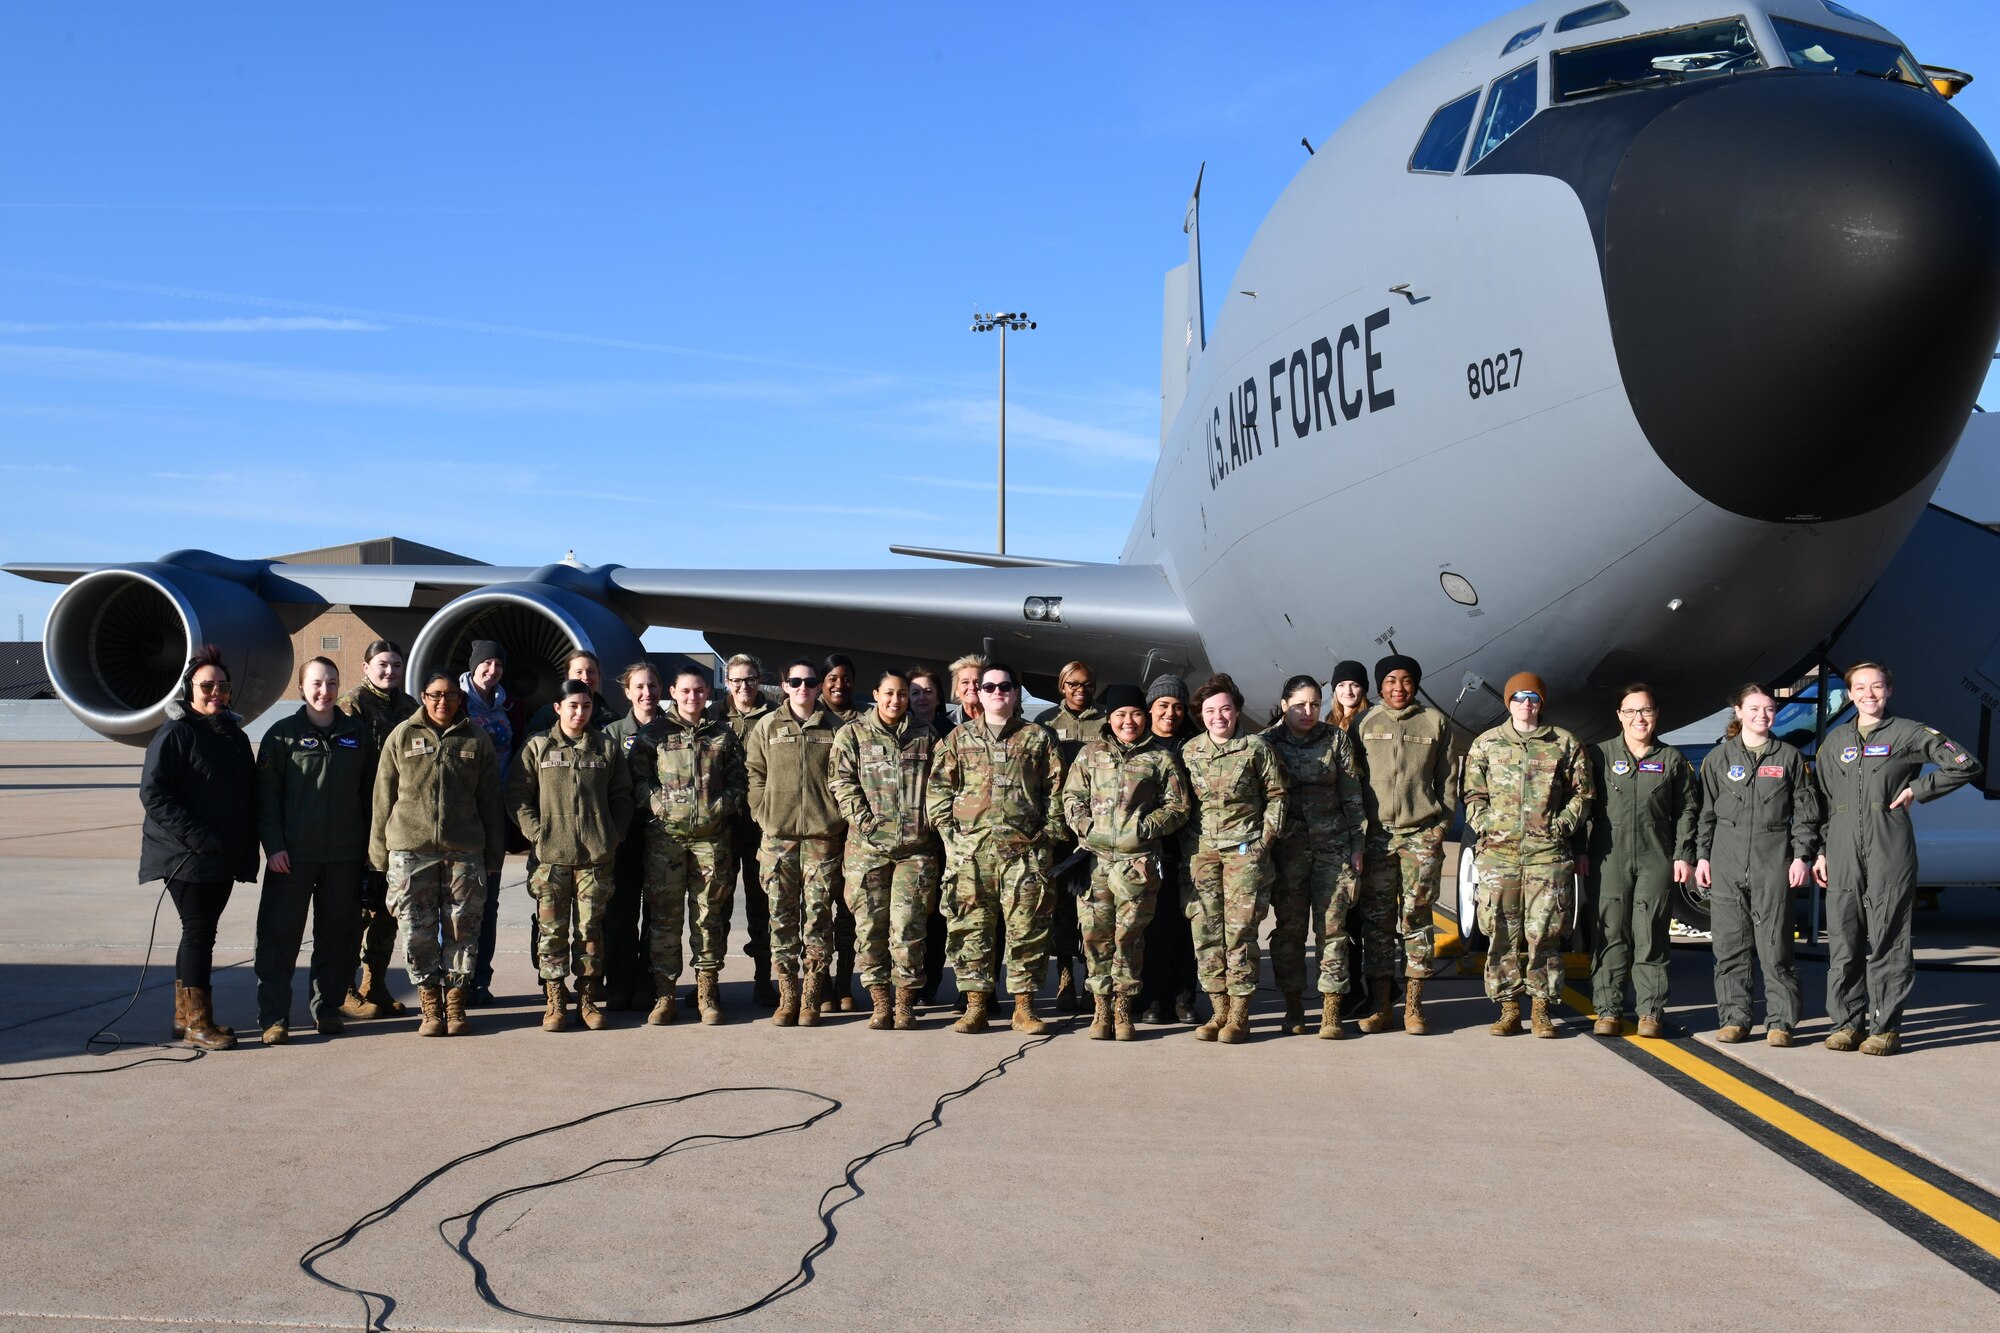 Female Airmen from the 97th Air Mobility Wing pose for a photo in front of a KC-135 Stratotanker at Altus Air Force Base, Oklahoma, March 28, 2023. Women make up more than 20 percent of the total enlisted force. (U.S. Air Force photo by Airman 1st Class Miyah Gray)